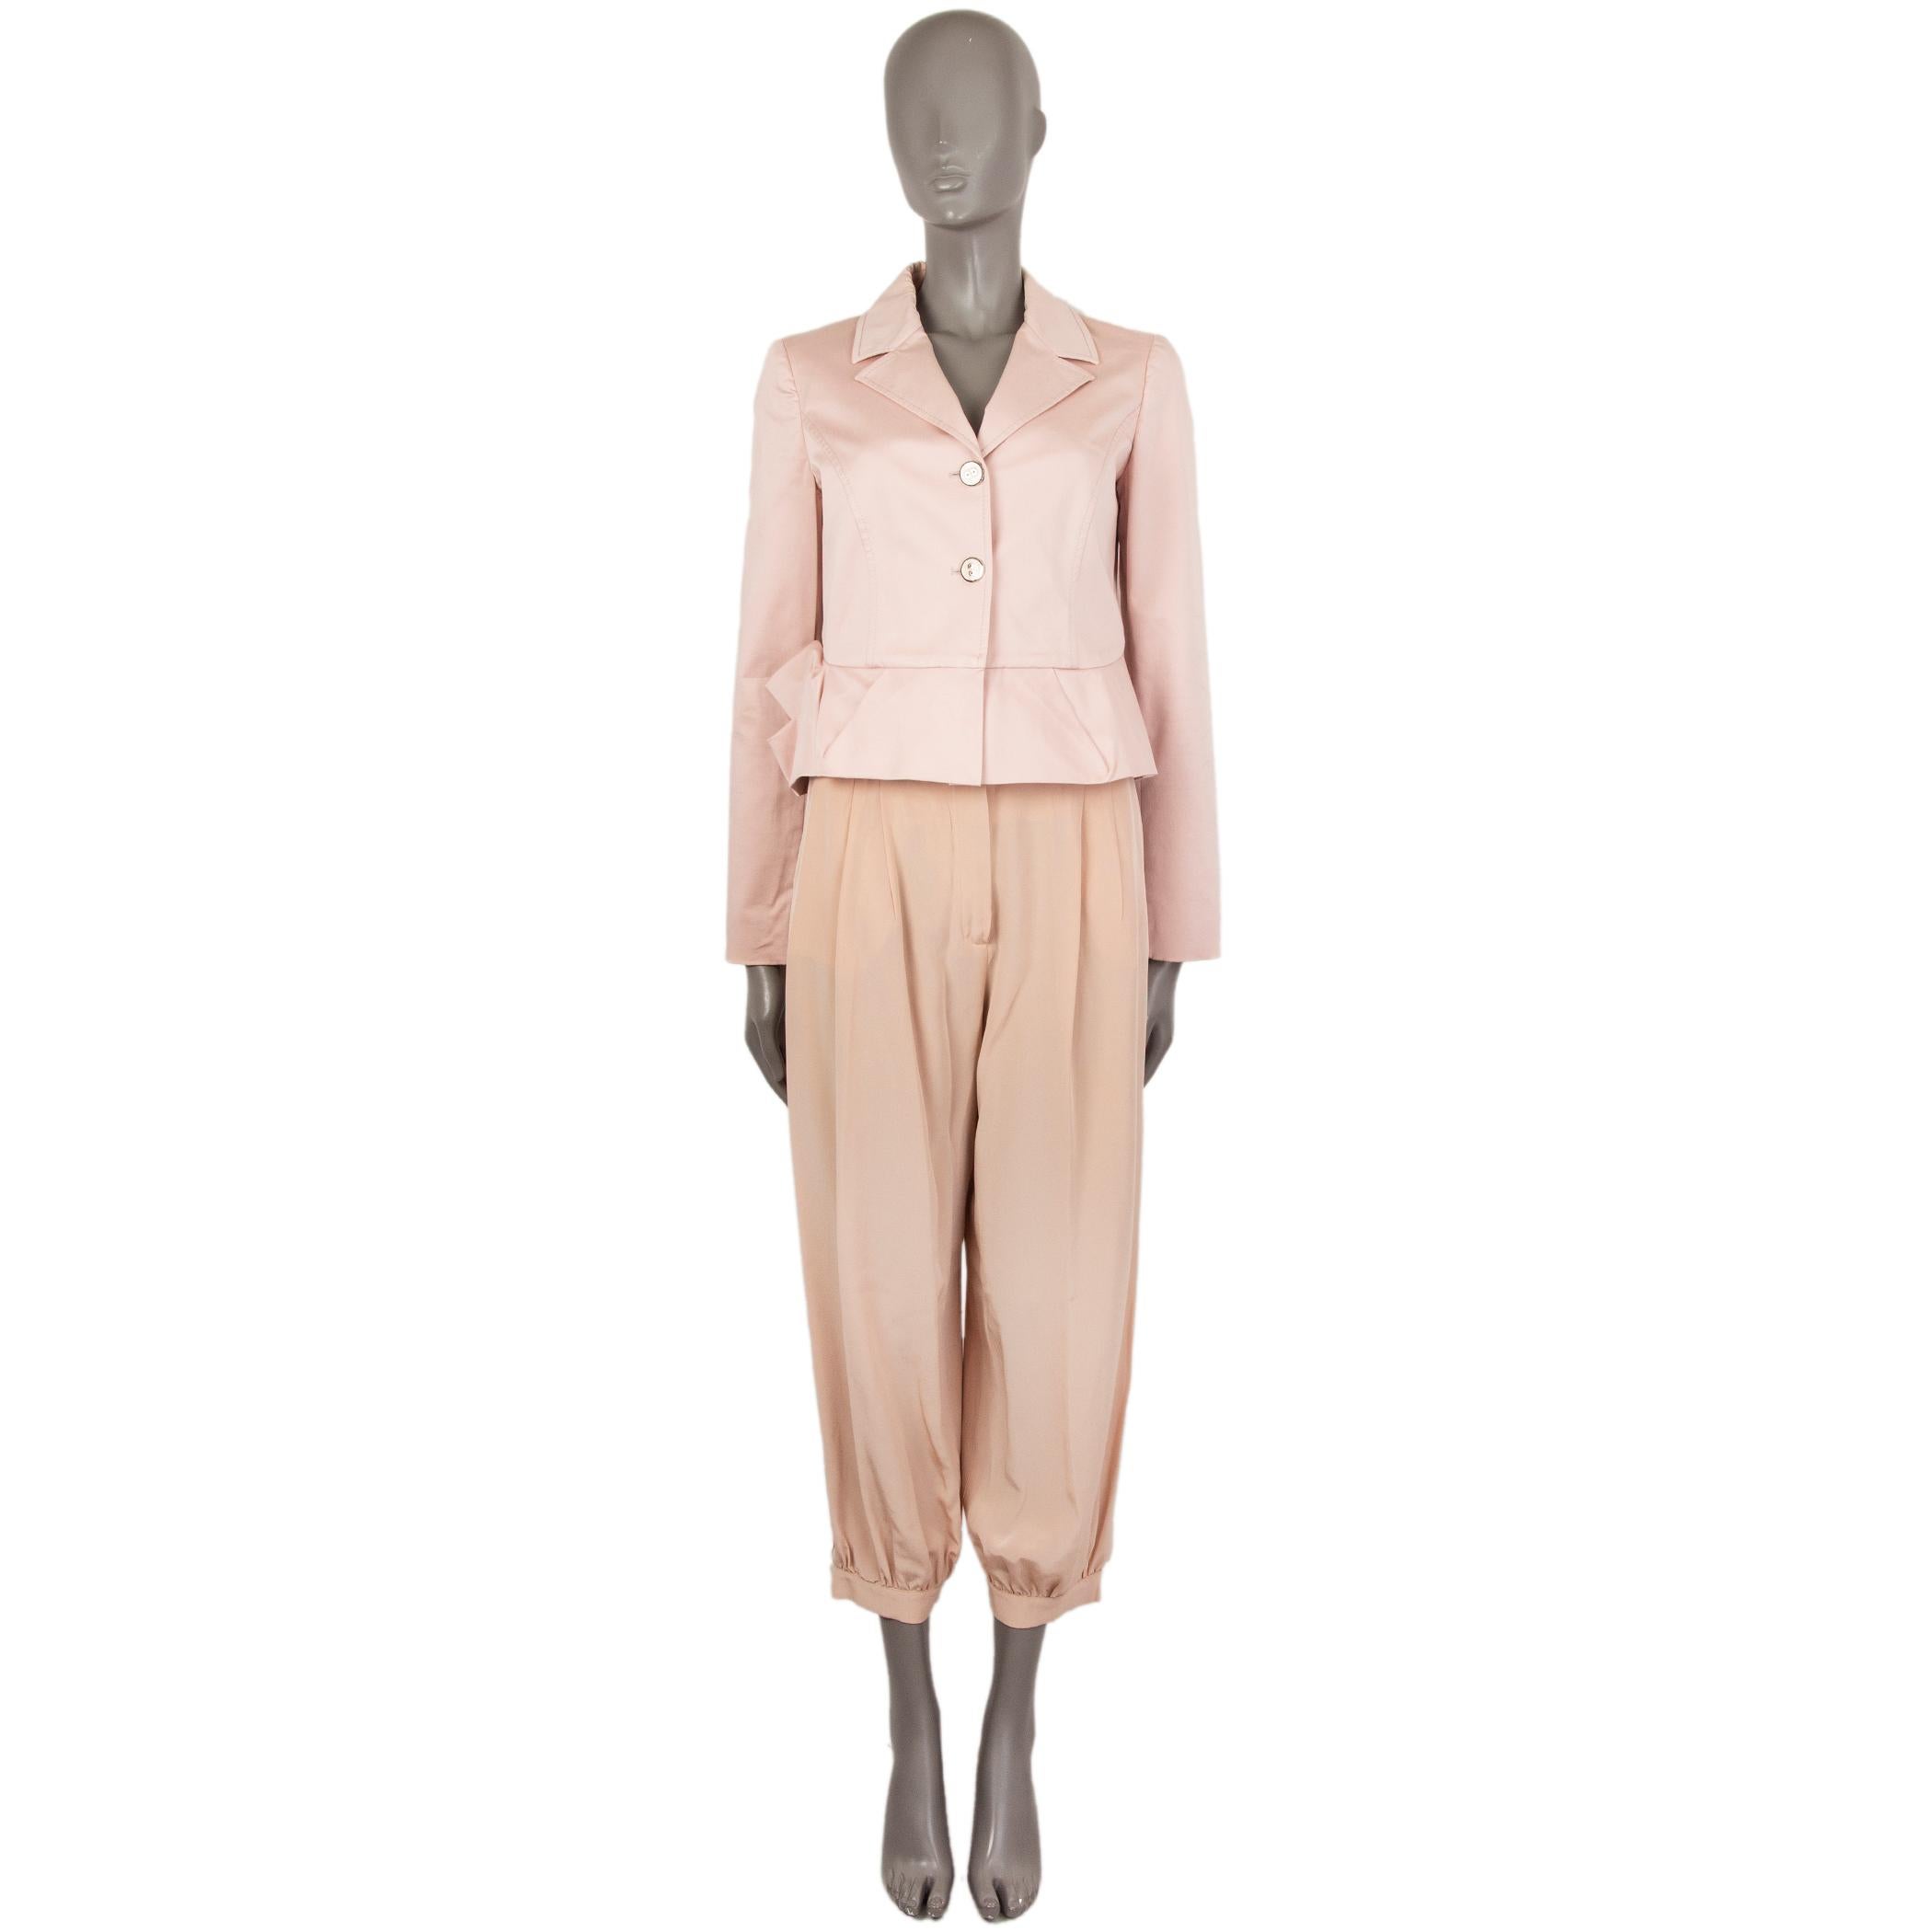 100% authentic RED Valentino notch-collar blazer in rose cotton (97%) and elastane (3%). With pleated flute hemline and buttoned cuffs. CLoses with silver and nude enamel buttons on the front. Lined in salmon acetate (67%) and polyester (33%). Has